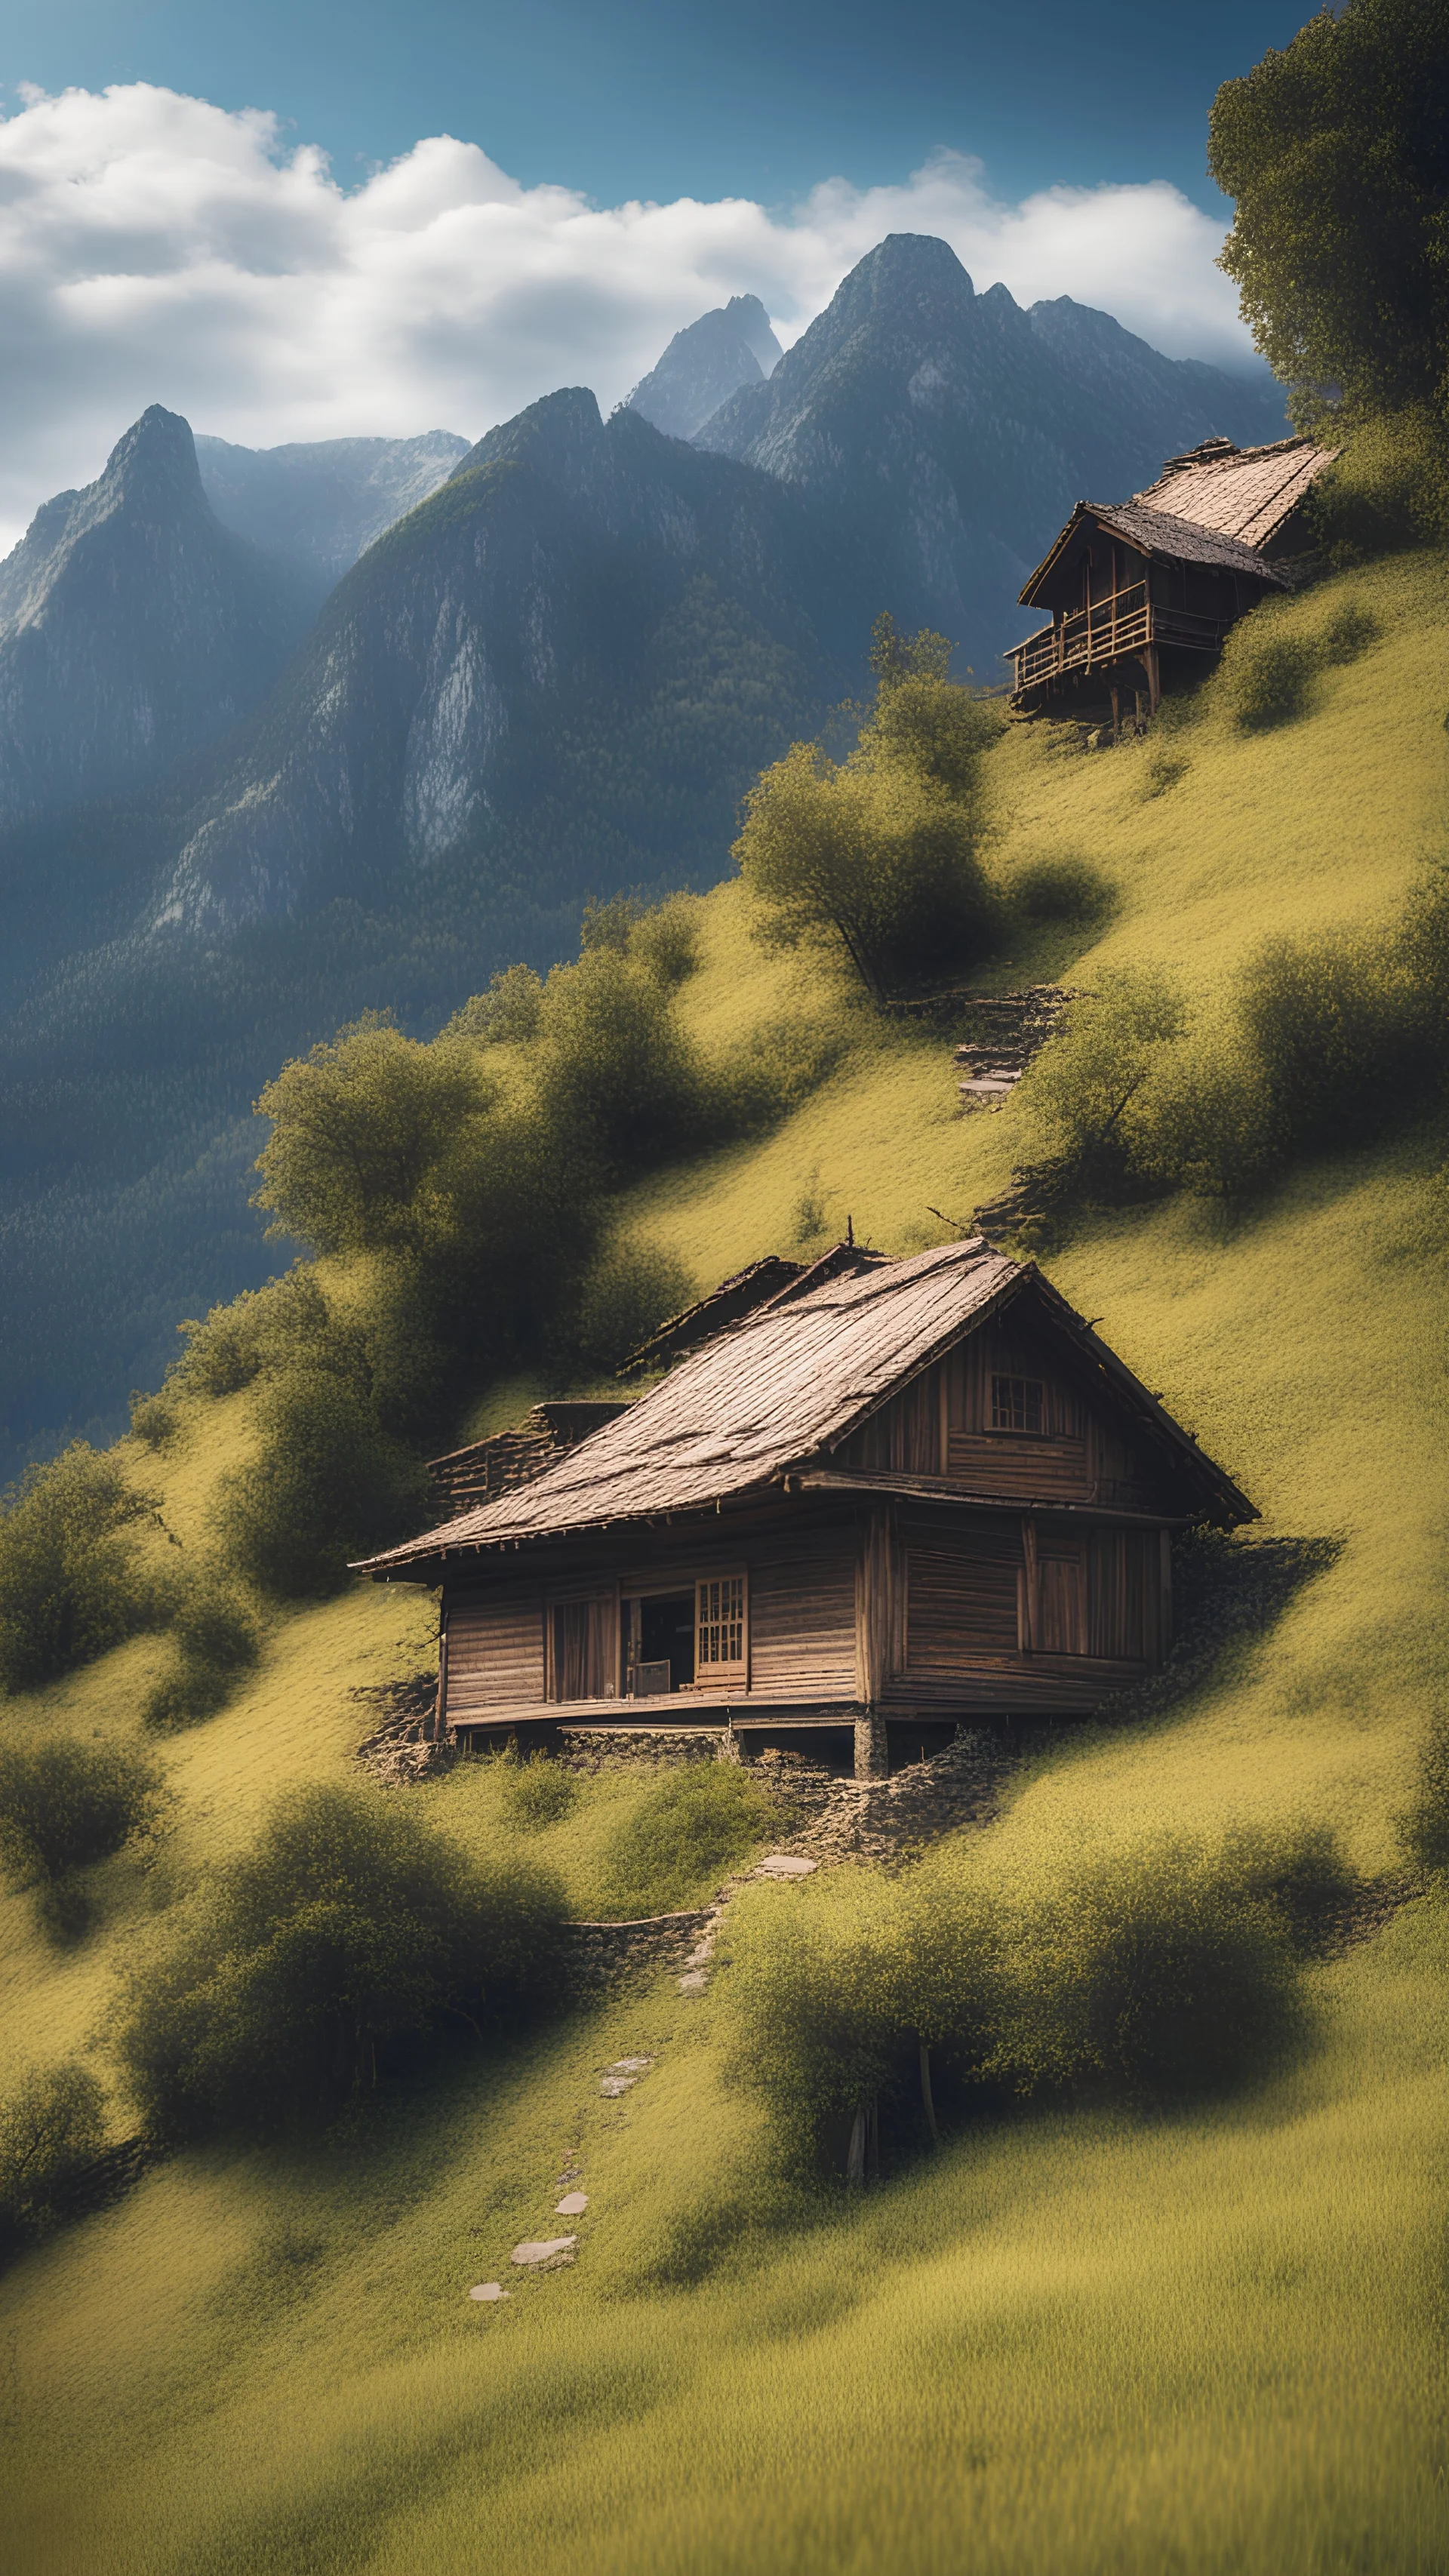 old wooden house in a hill, in the center, one house, sky above, mountain, chill, vibrant